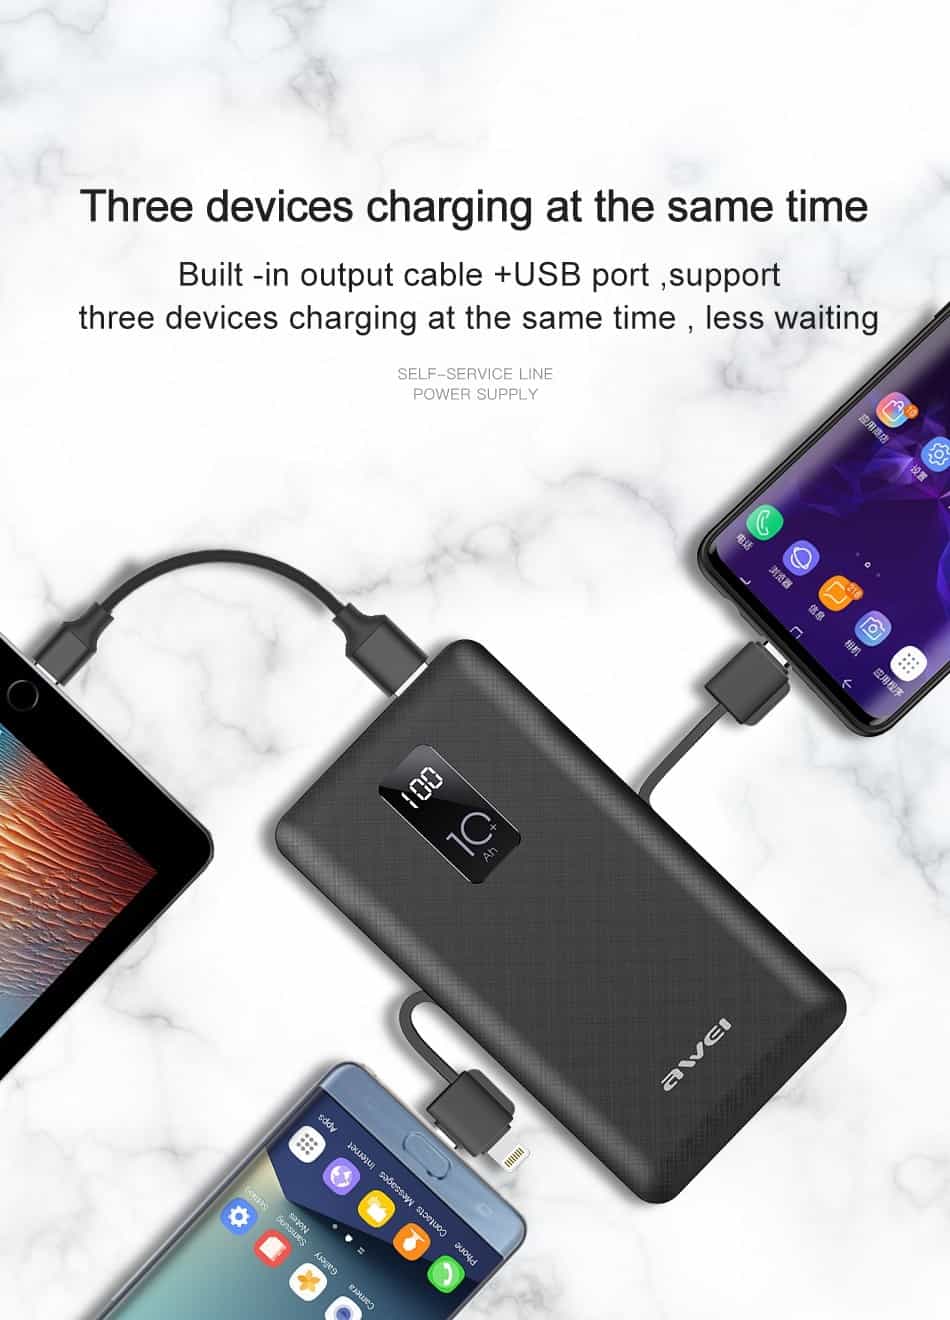 Awei Power Bank 10000mAh LED Display Portable Charger Quick External Battery Built in 3 Cables Lightning Type C Micro for Phone